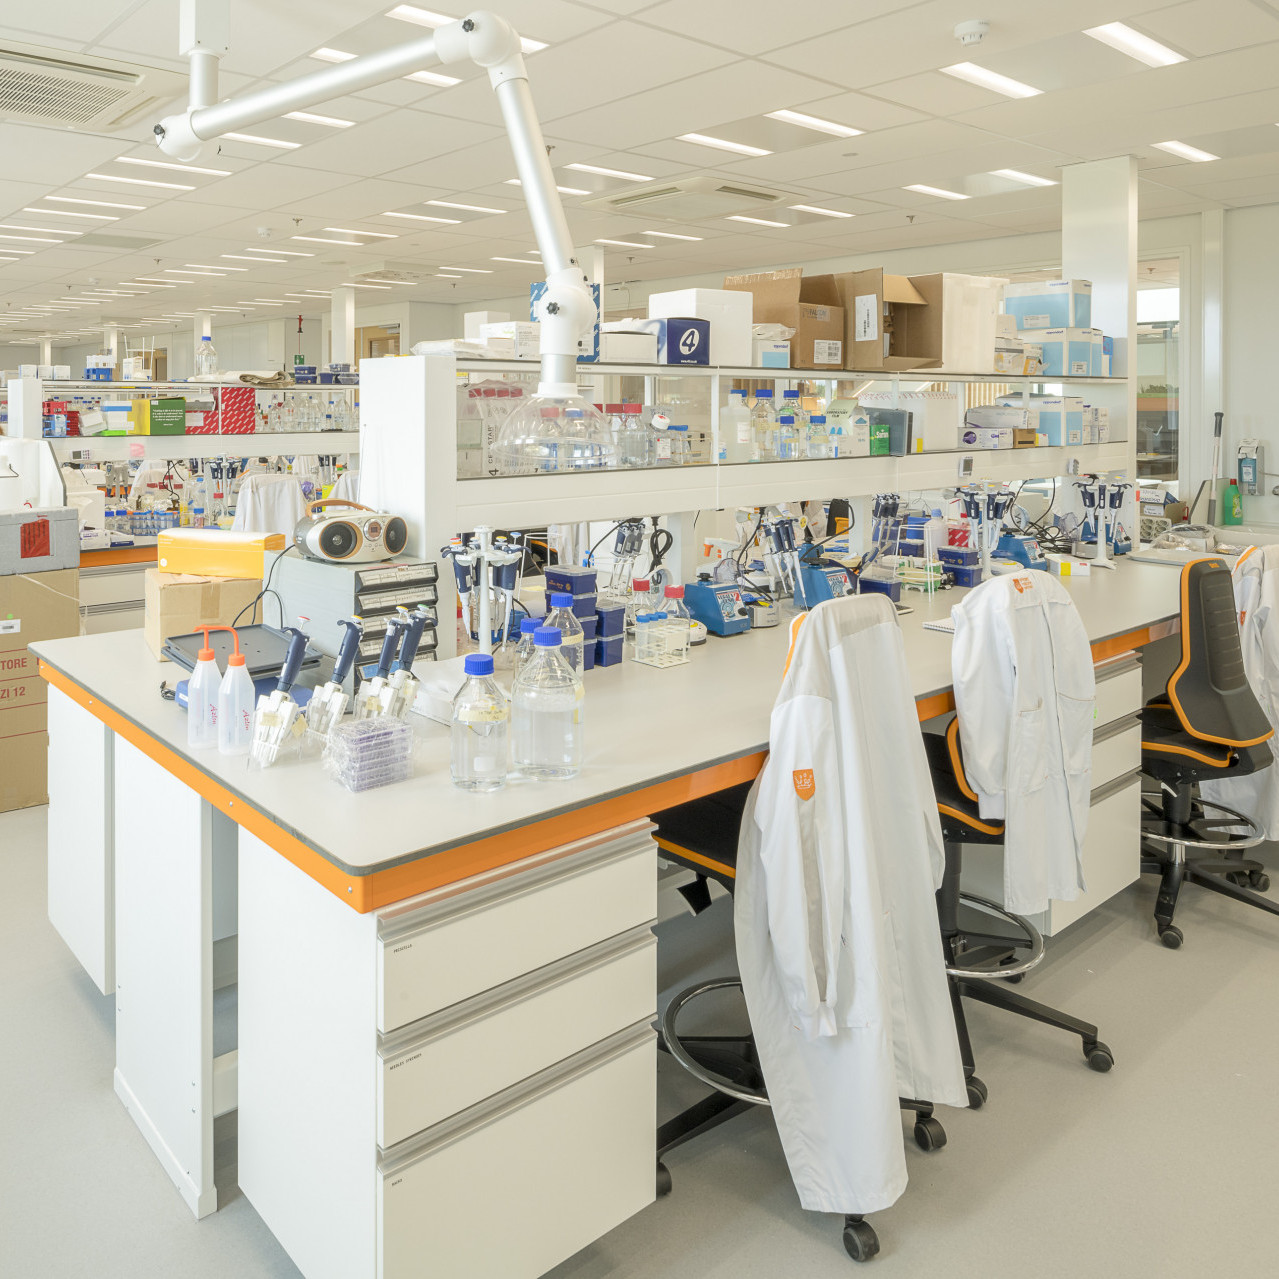 Expansion research department ready in the course of 2019